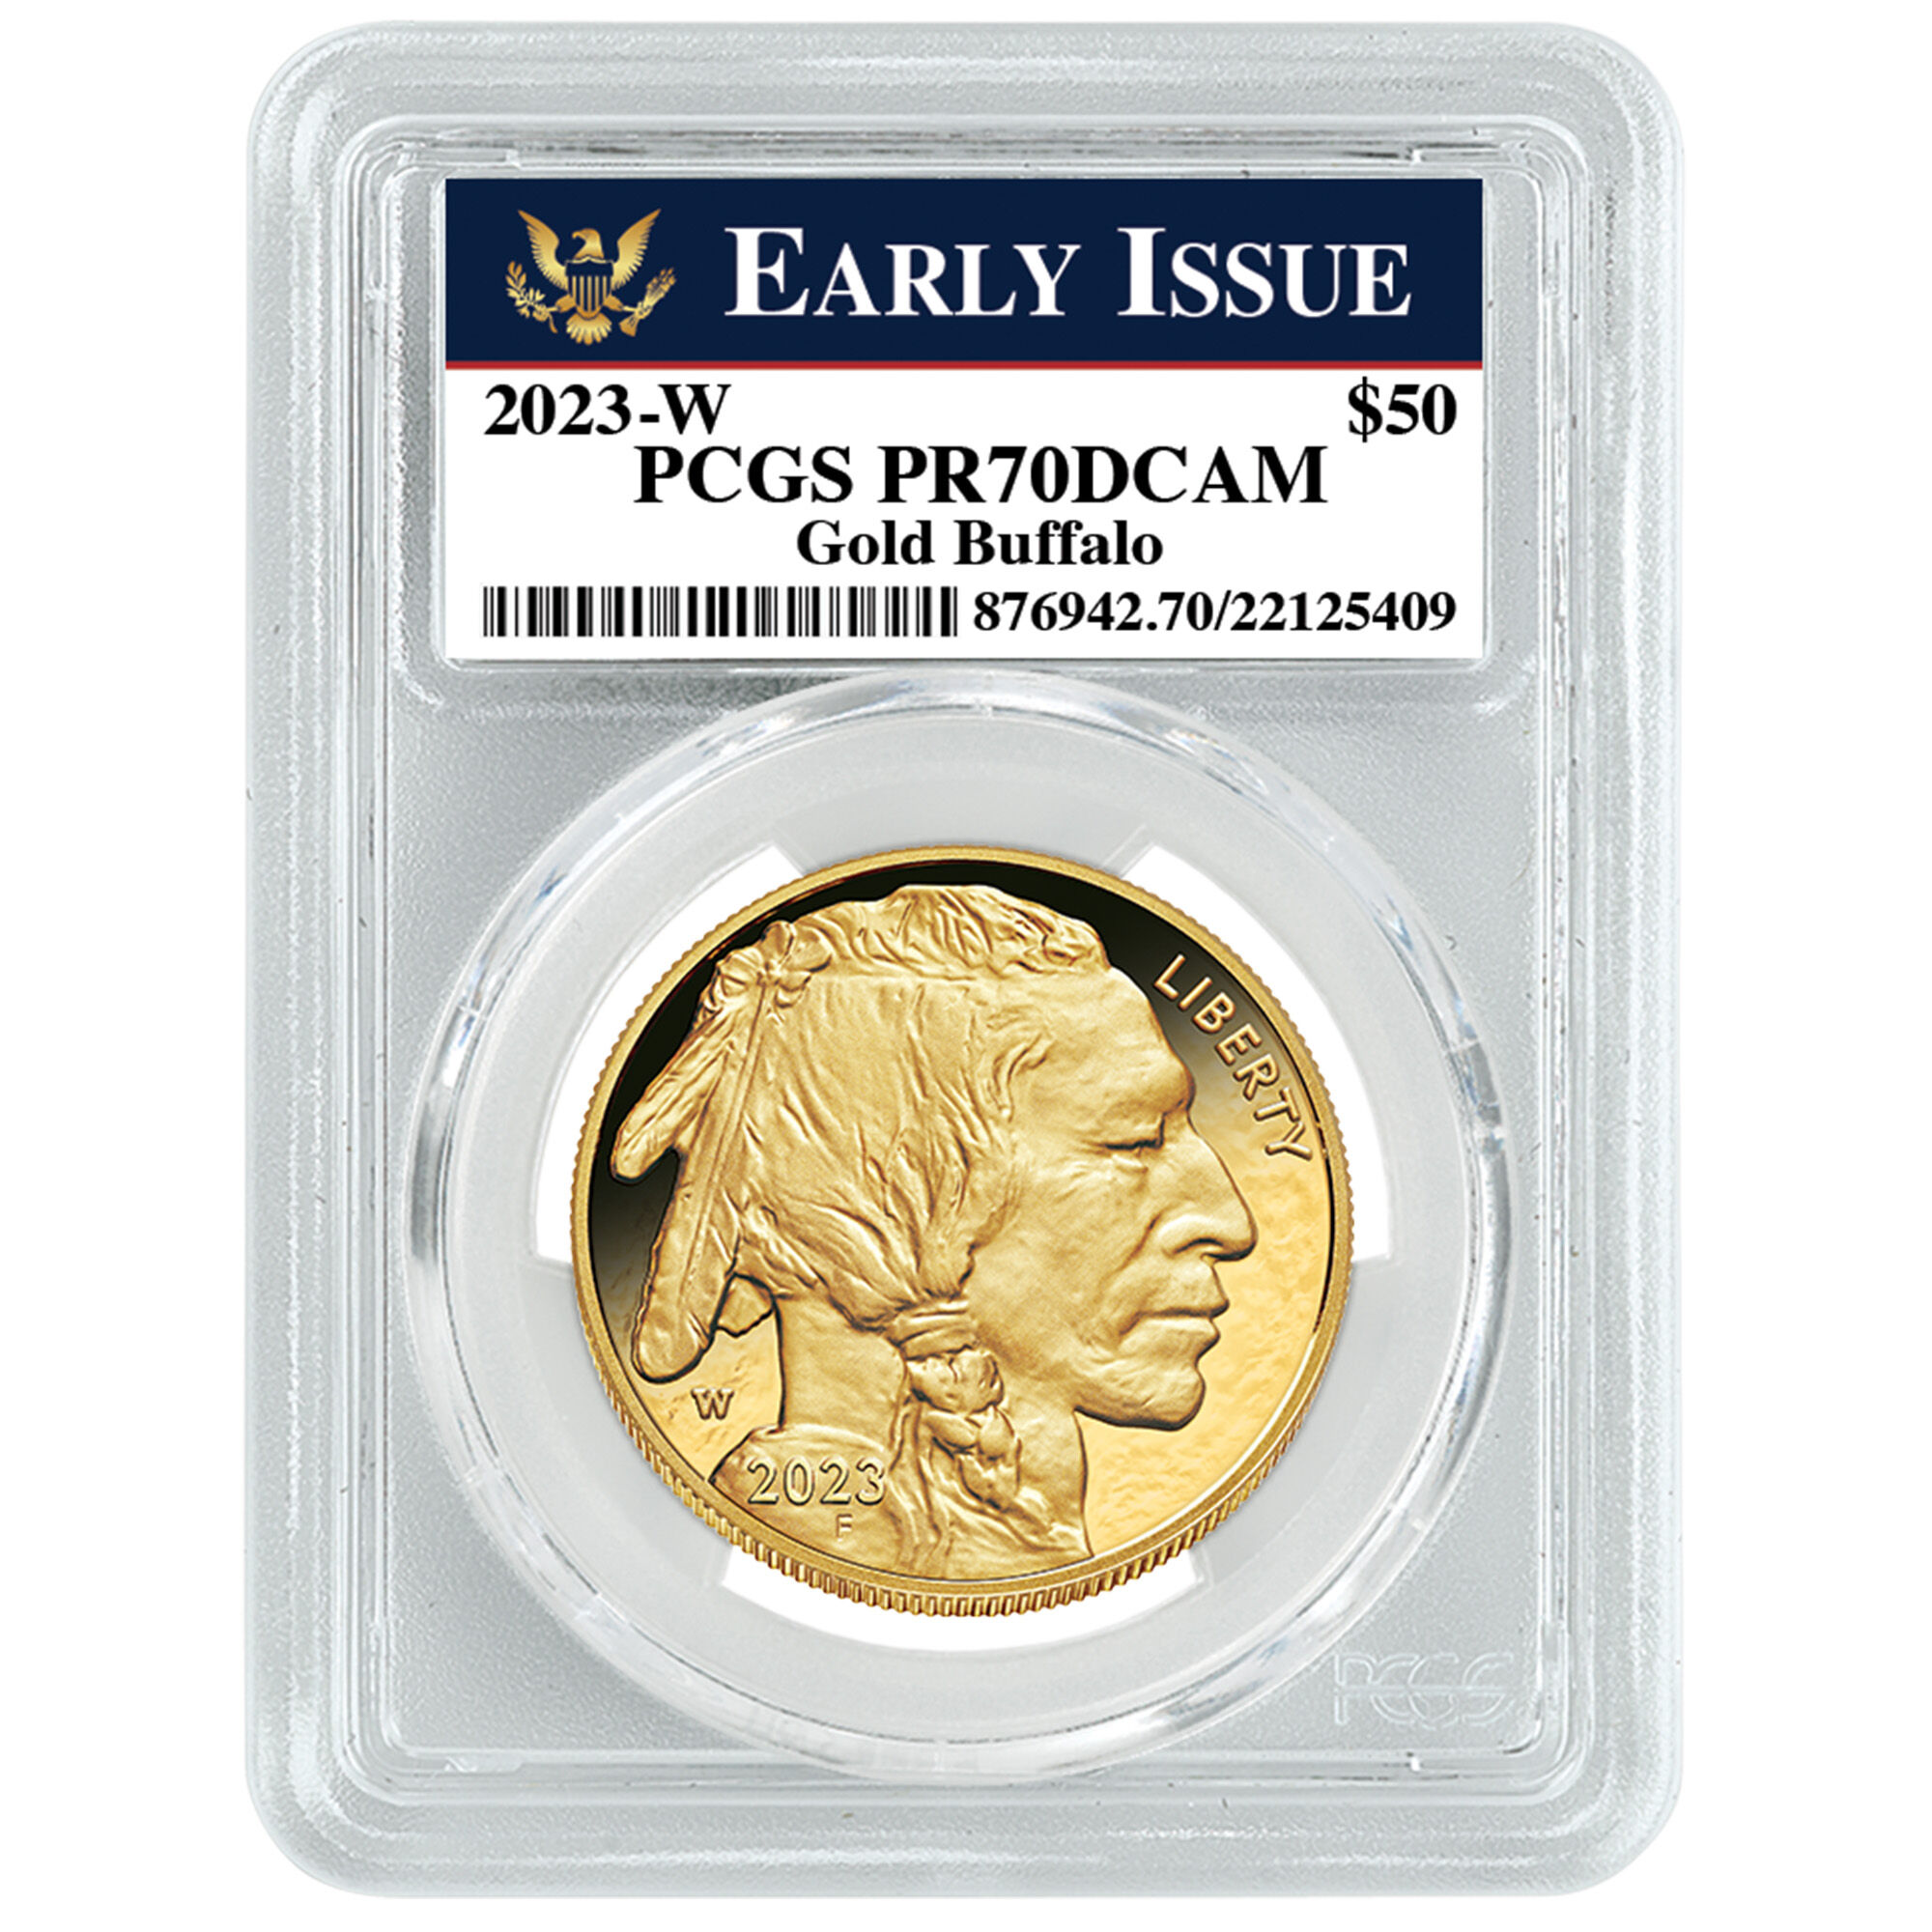 This week's (April 11, 2023) Tuesday Night Auction for kids: Old gold coin  & Confederate money - Special Deals for InterNACHI Inspectors -  InterNACHI®️ Forum